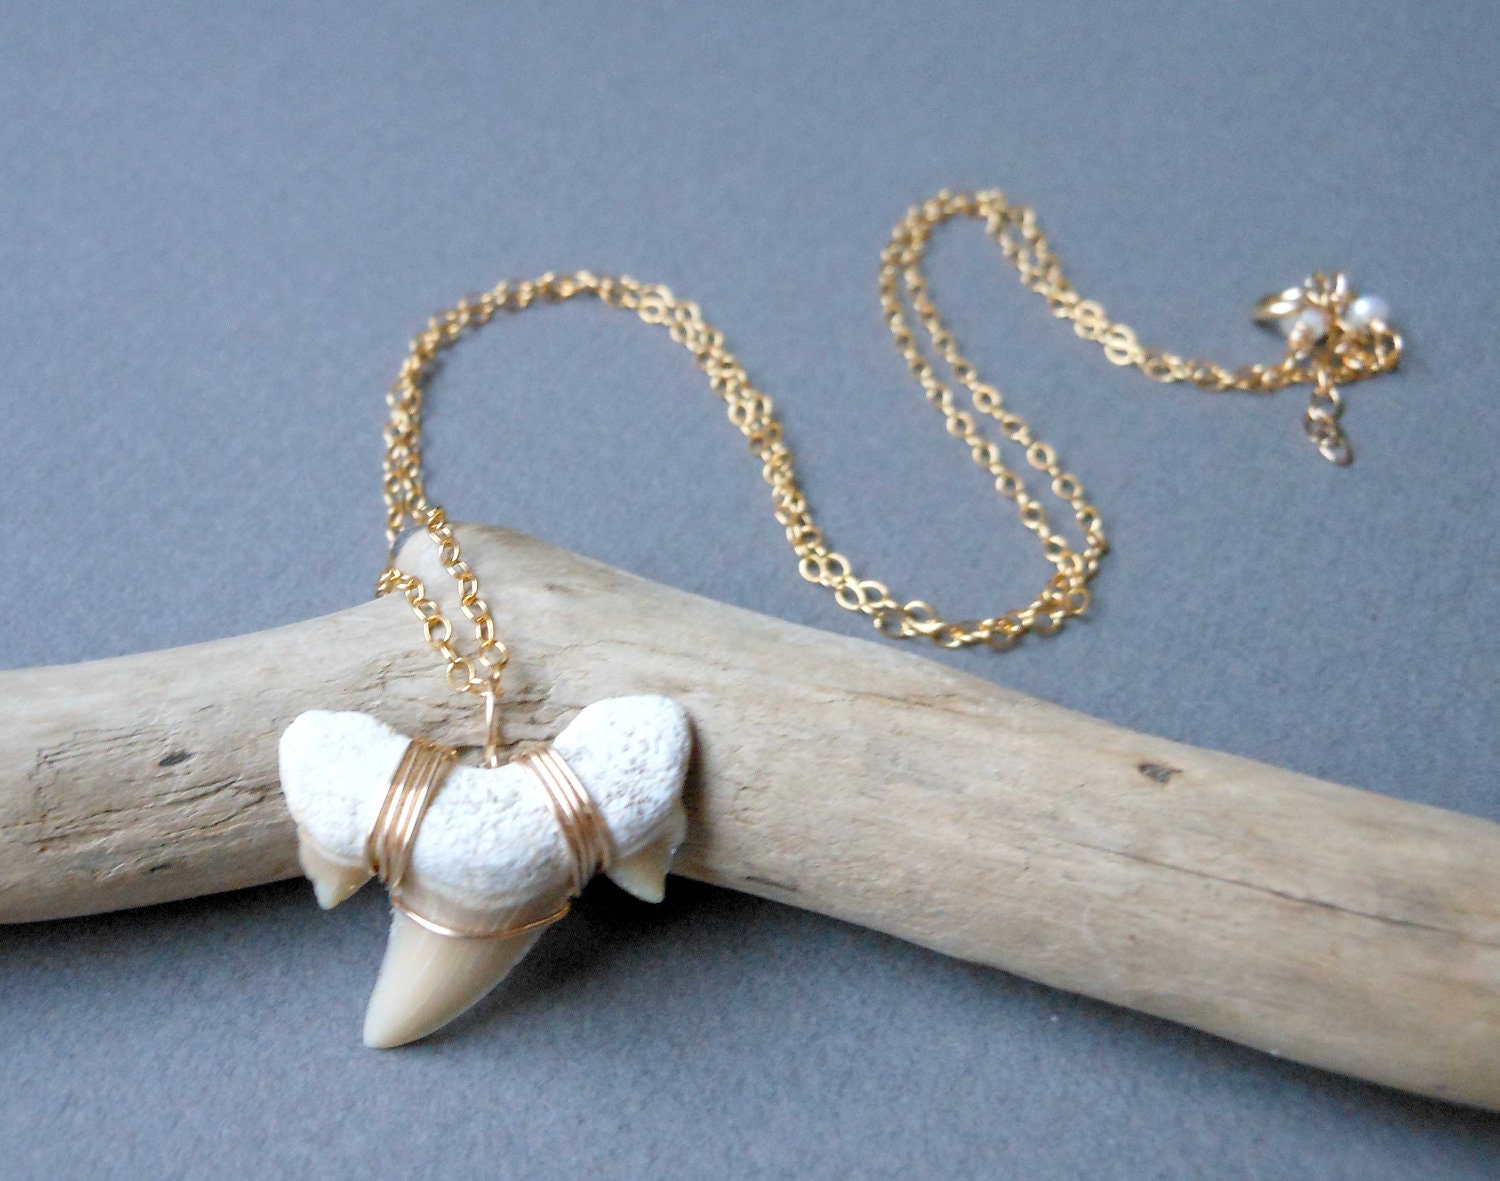 Great White Necklace Shark tooth necklace 14kt gold fill